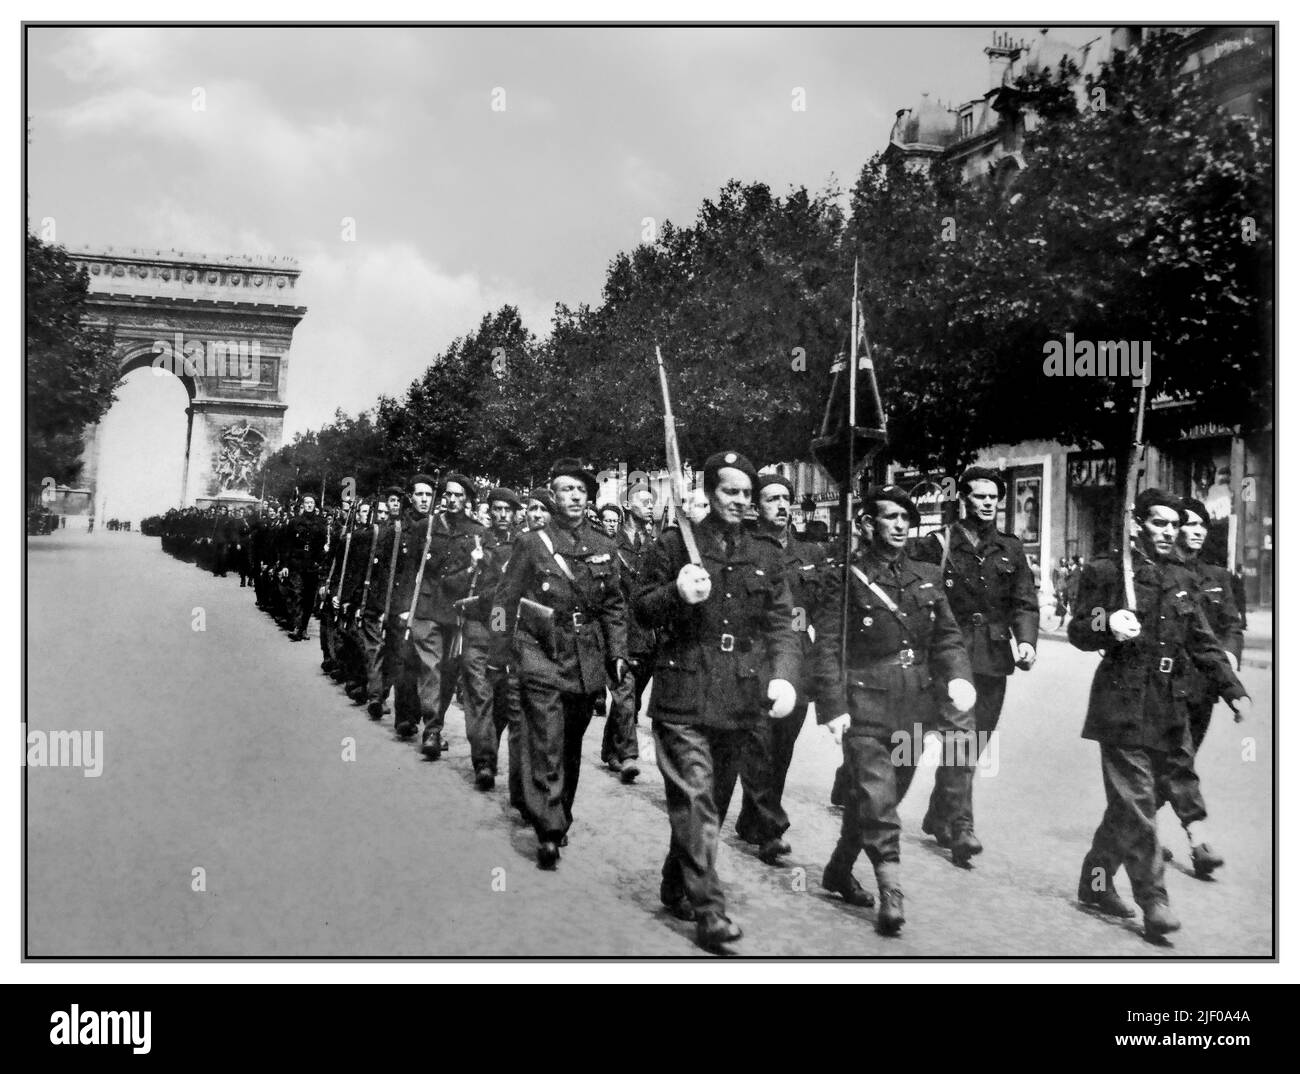 Vichy France Nazi collaborators of French Militia Battalion army march down the Champs Elysees with Arc de Triomphe in background Paris 1940s WW2 France Stock Photo